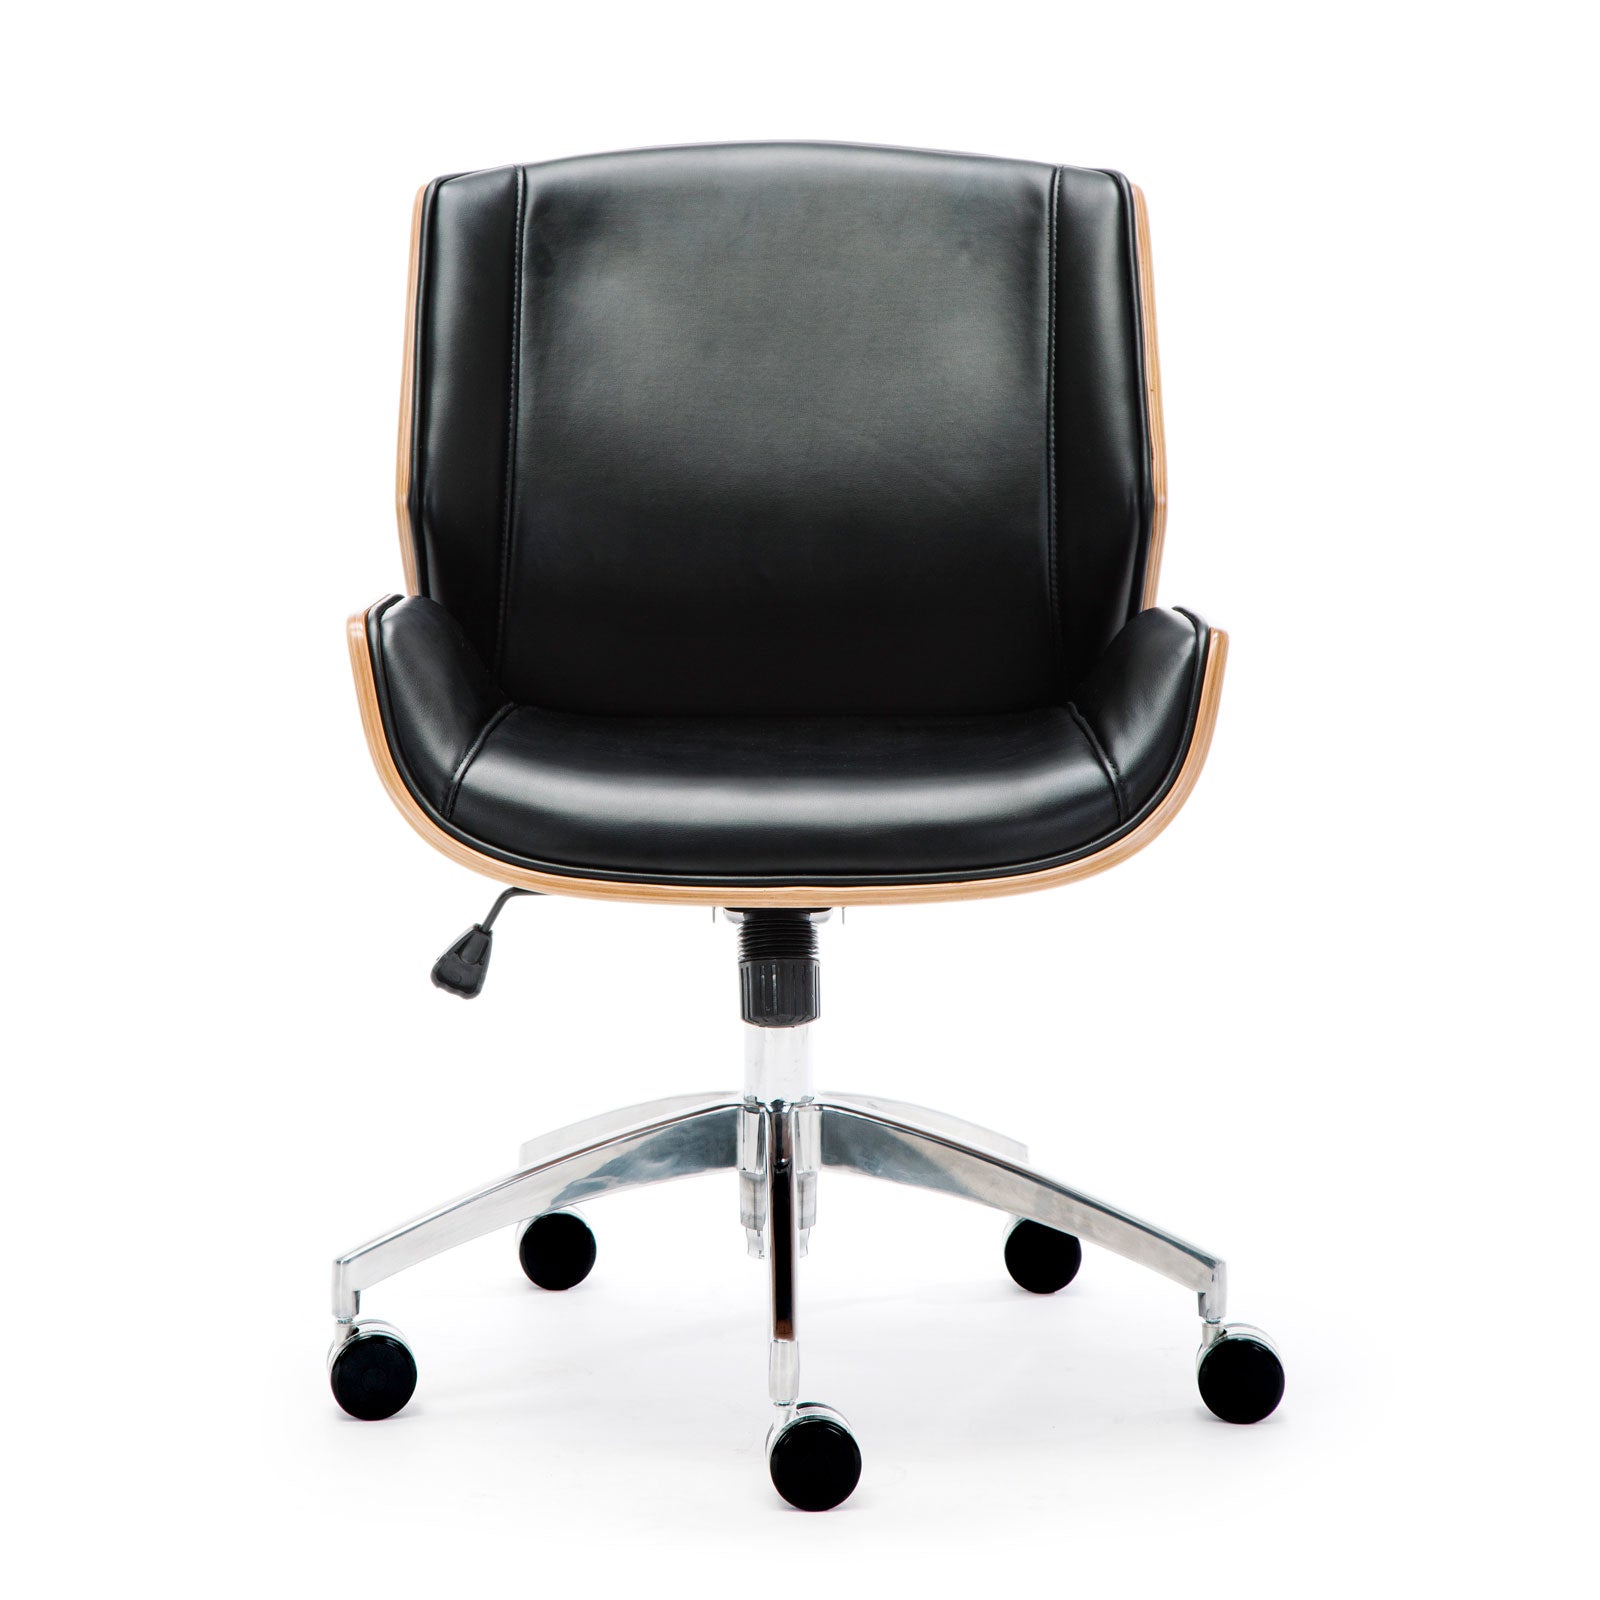 Wooden & PU Leather Office Chair Grosvenor Executive Chair - Walnut